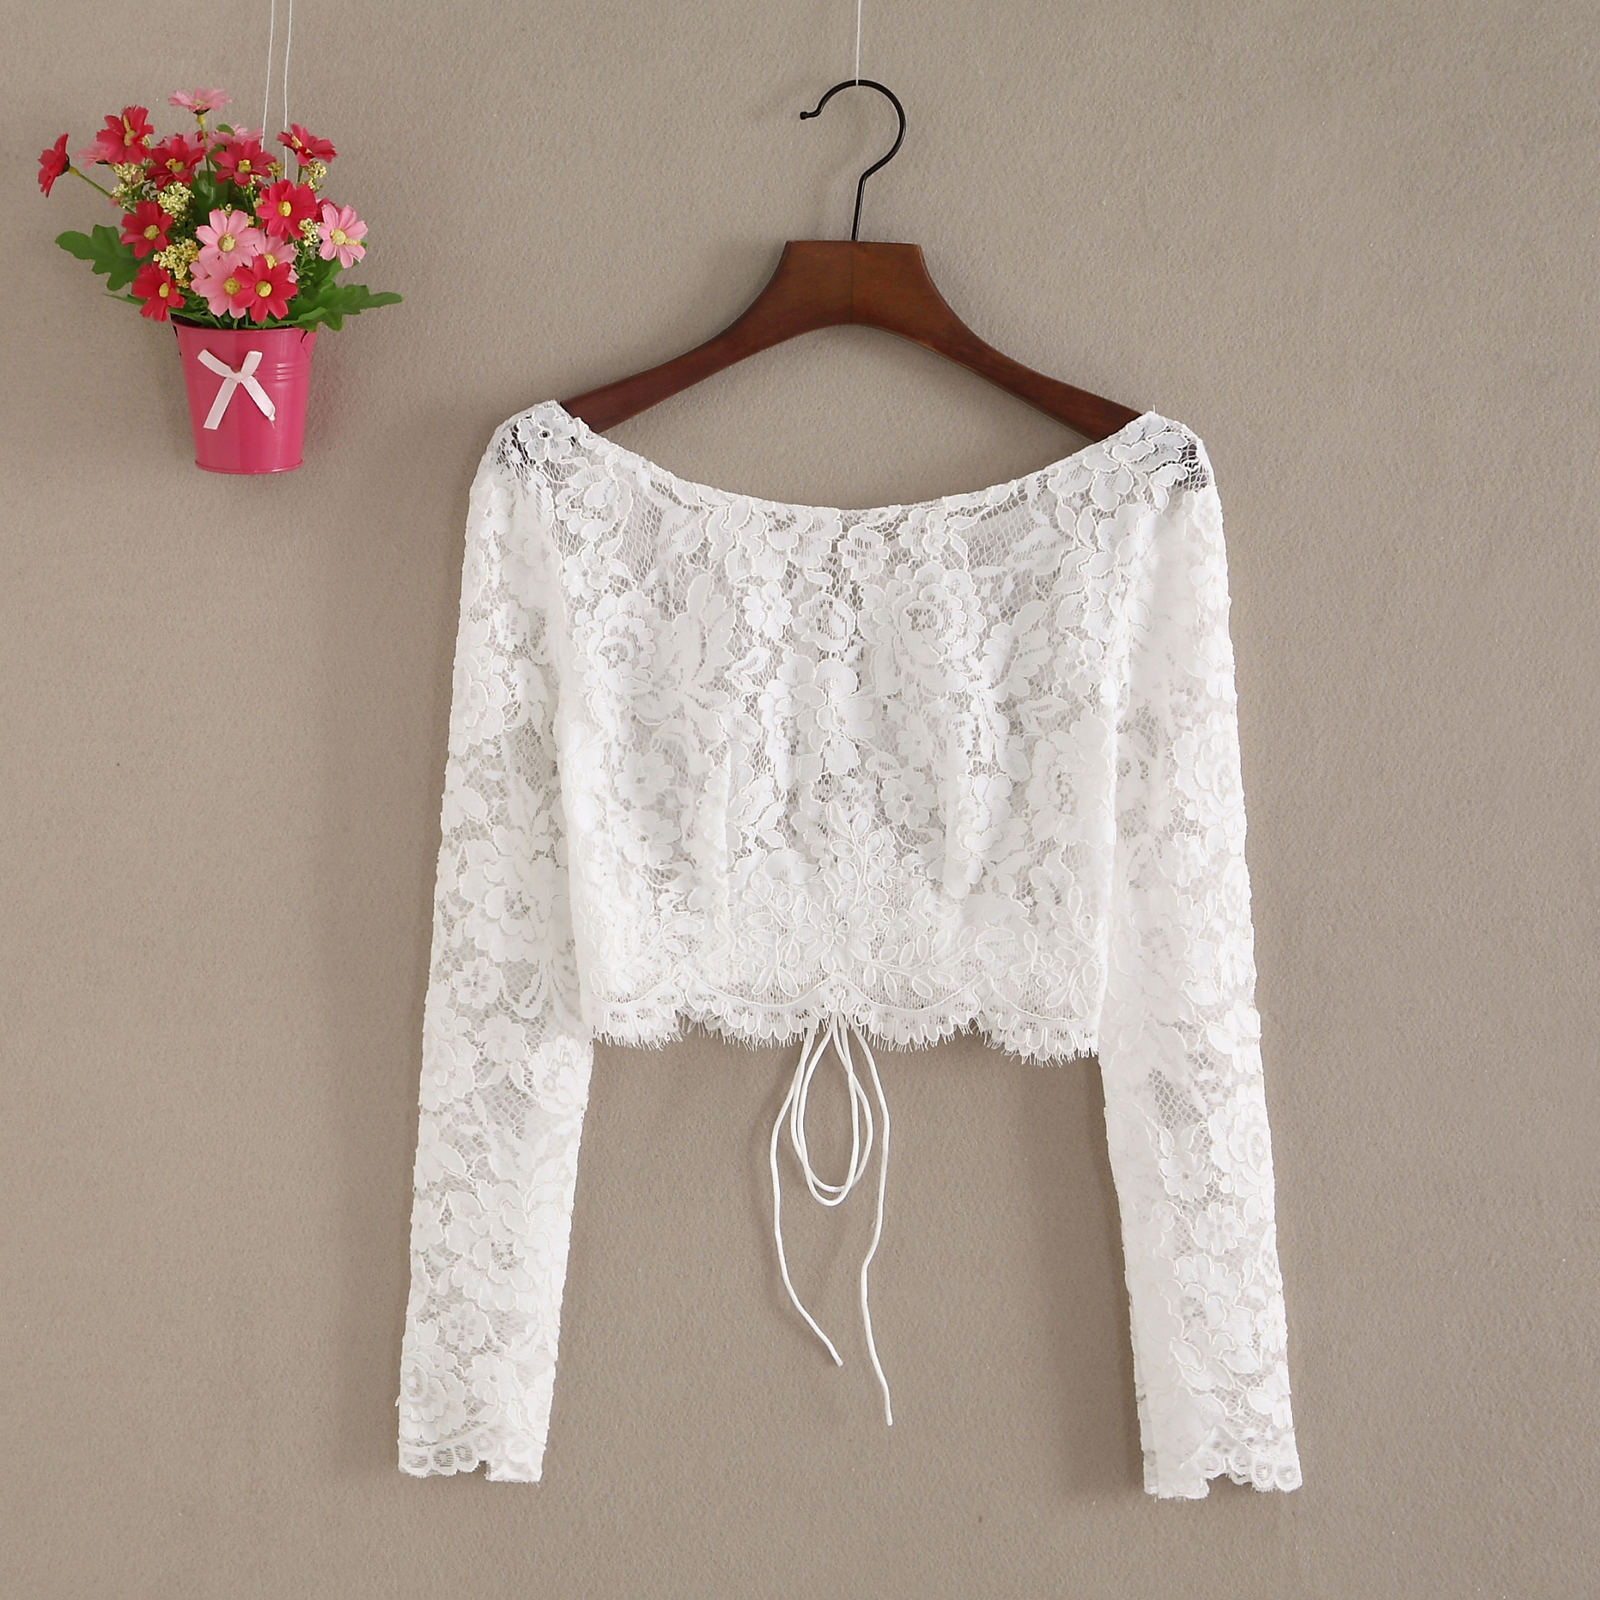 Lace Tops Long Sleeves Off-Shoulder Lace Crop Top White Bridesmaids ...